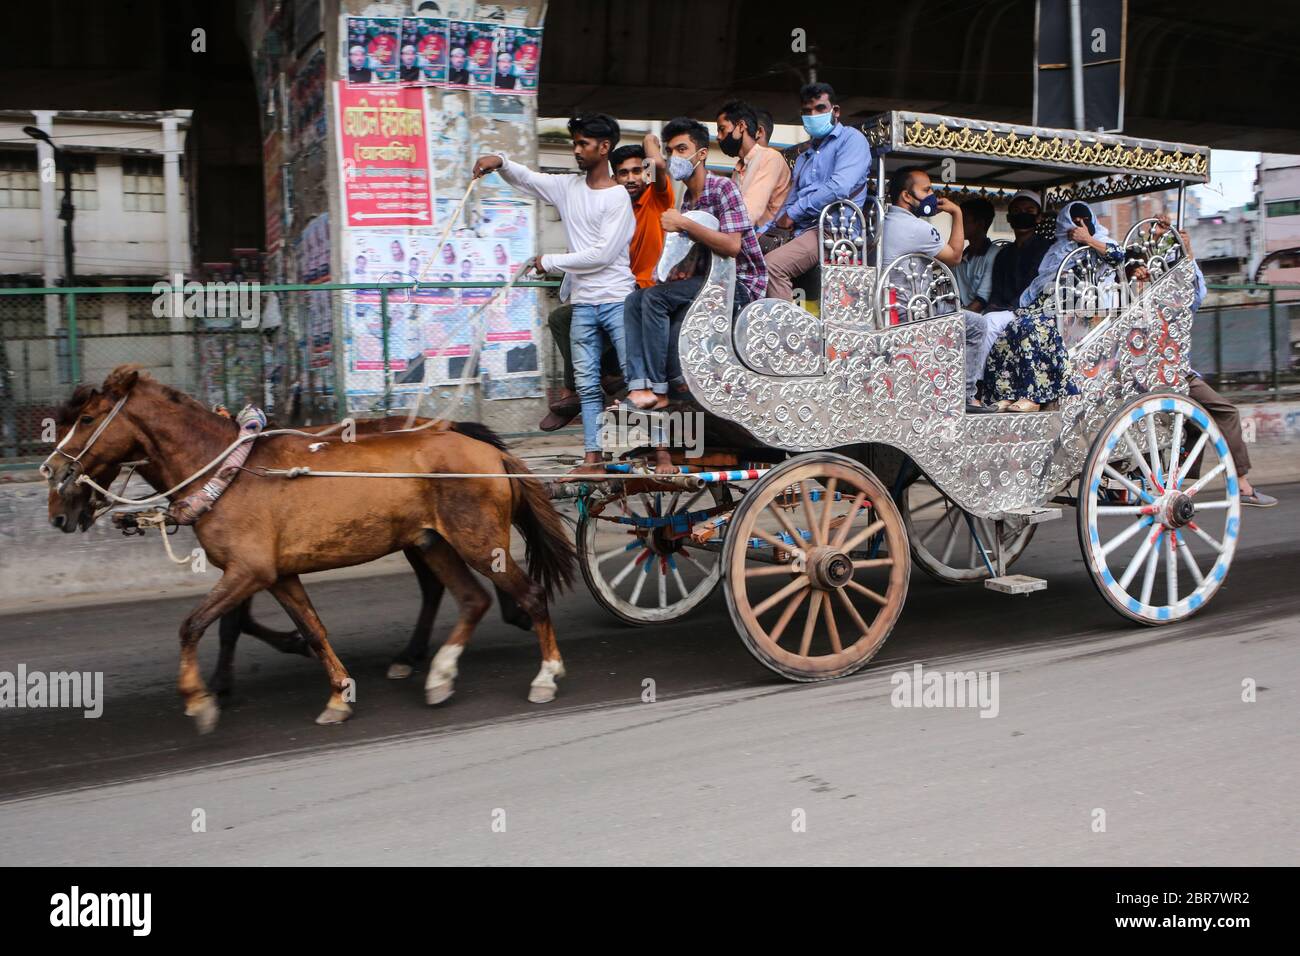 Bangla Meaning of Carriage